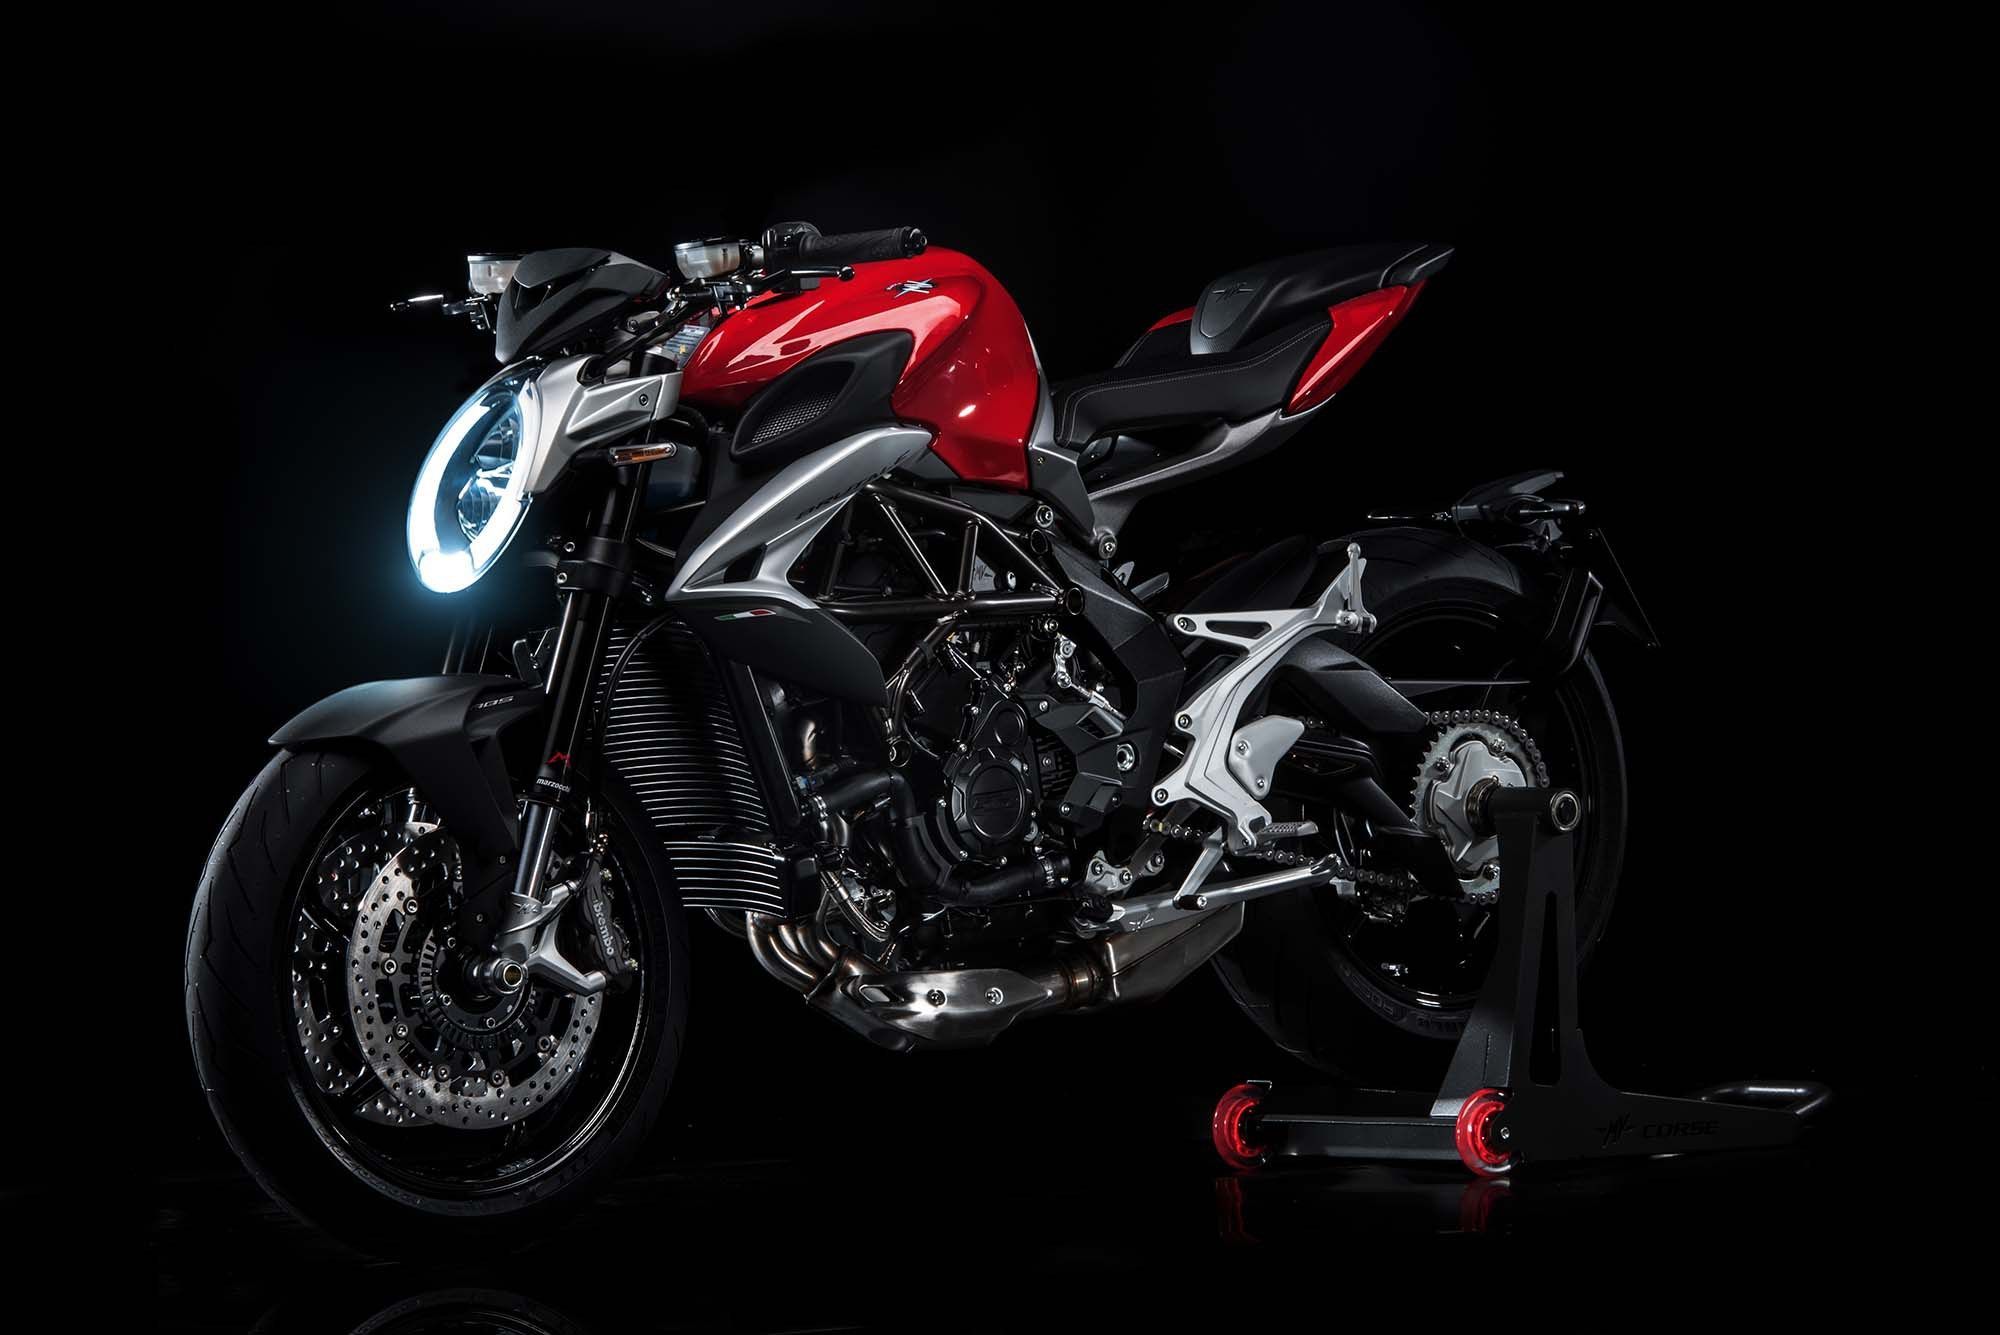 The 2016 MV Agusta Brutale 800: Seeing Red.